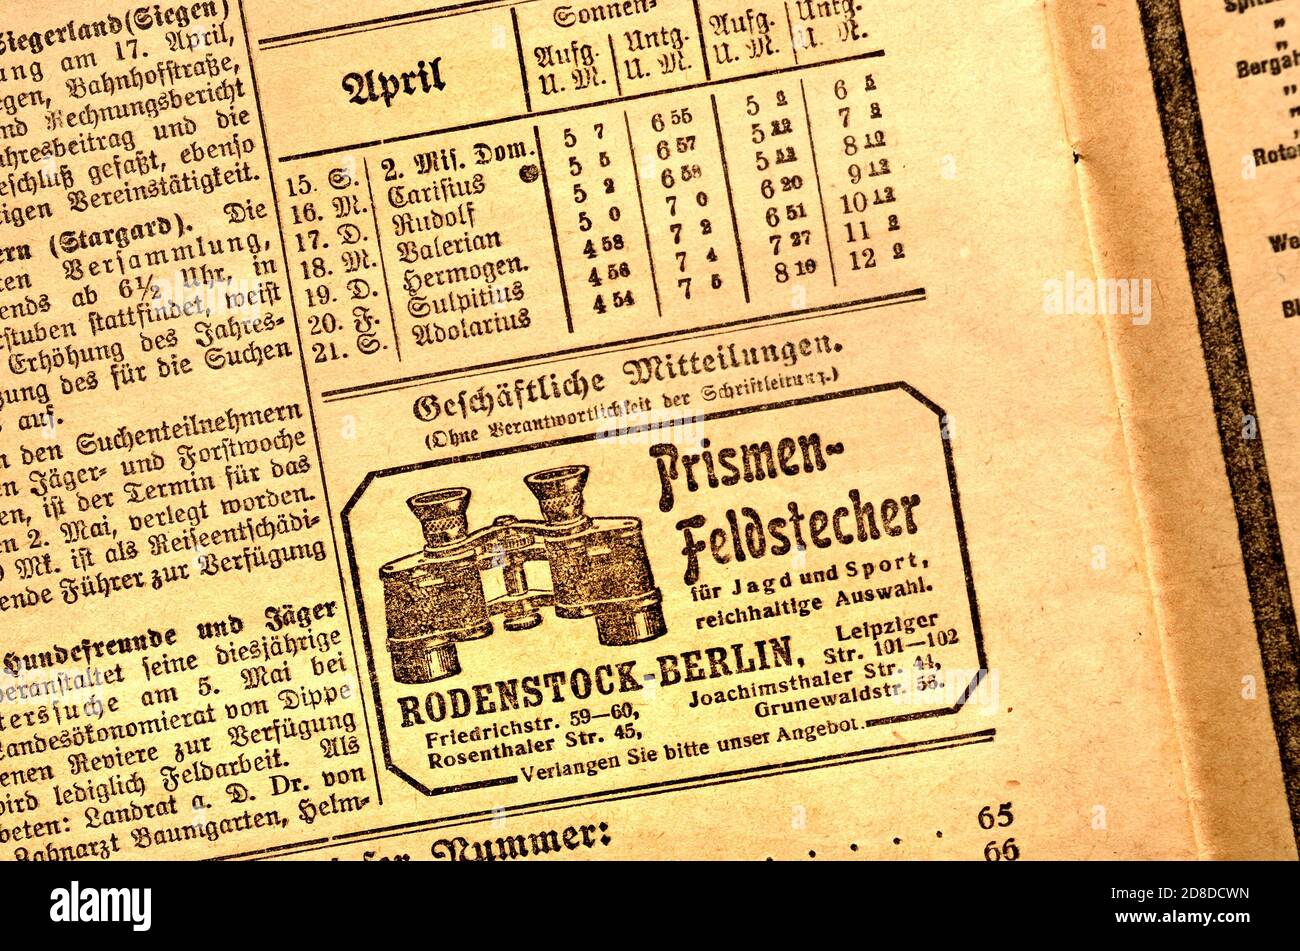 German document: Hunters' Newspaper / magazine: Deutsche Jaeger Zeitung (April 1923) classified ads at the back - Rodenstock binoculars, and a table.. Stock Photo